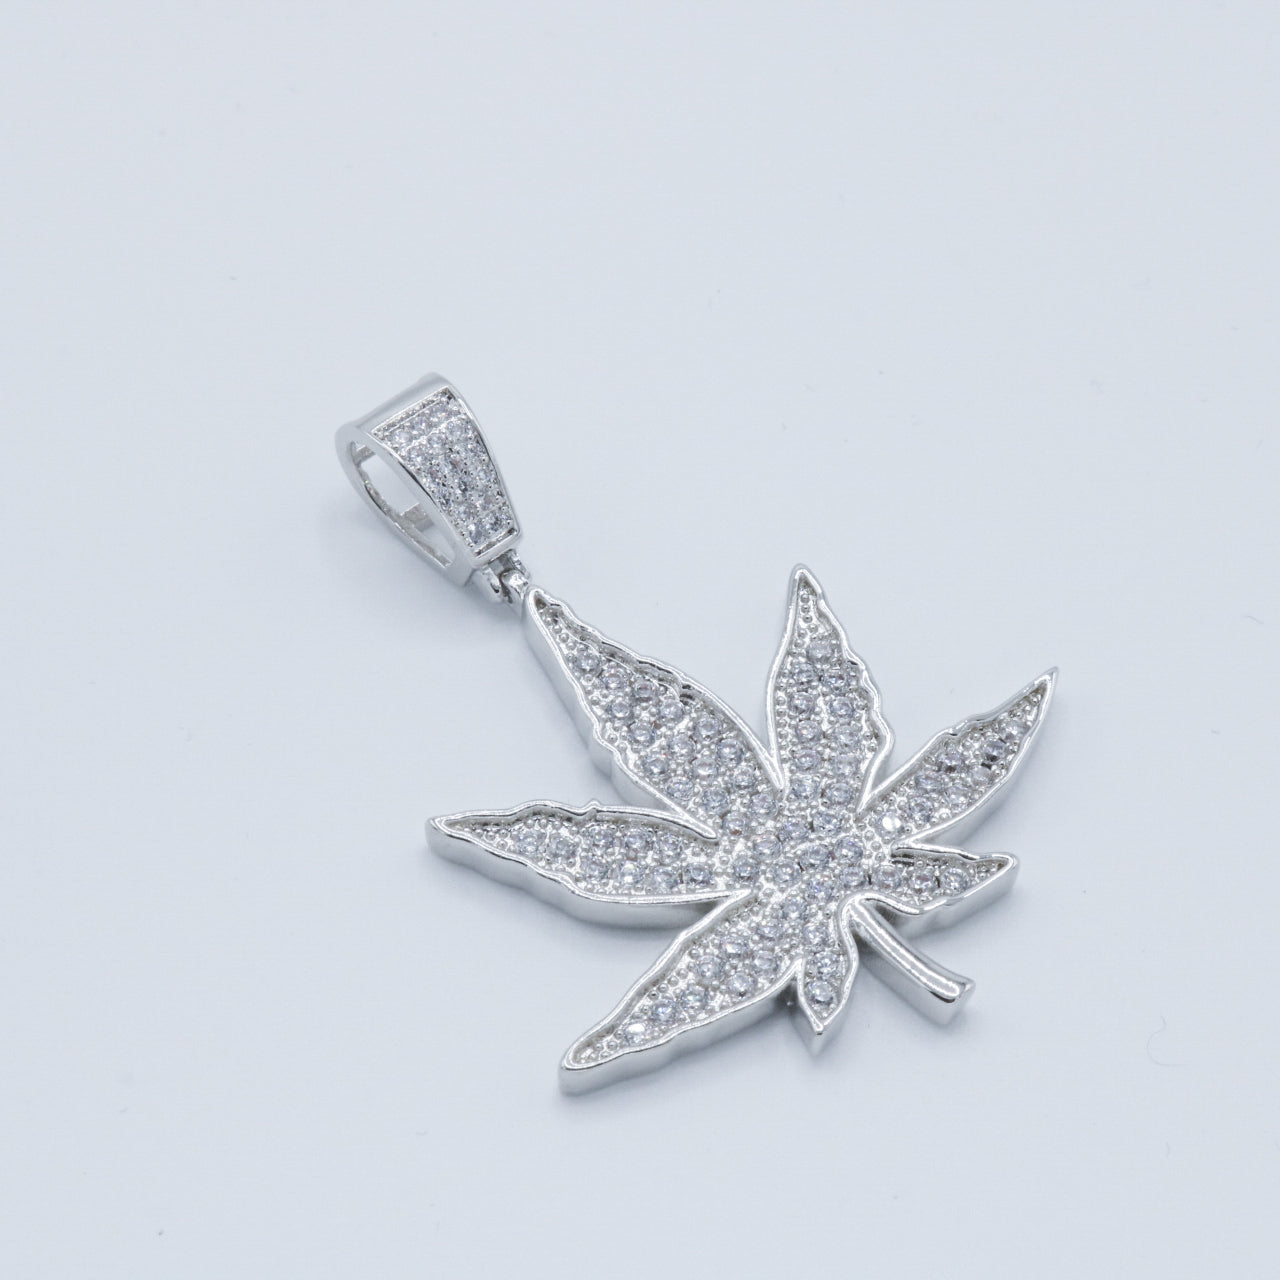 Iced out Weed Leaf pendant - White Gold